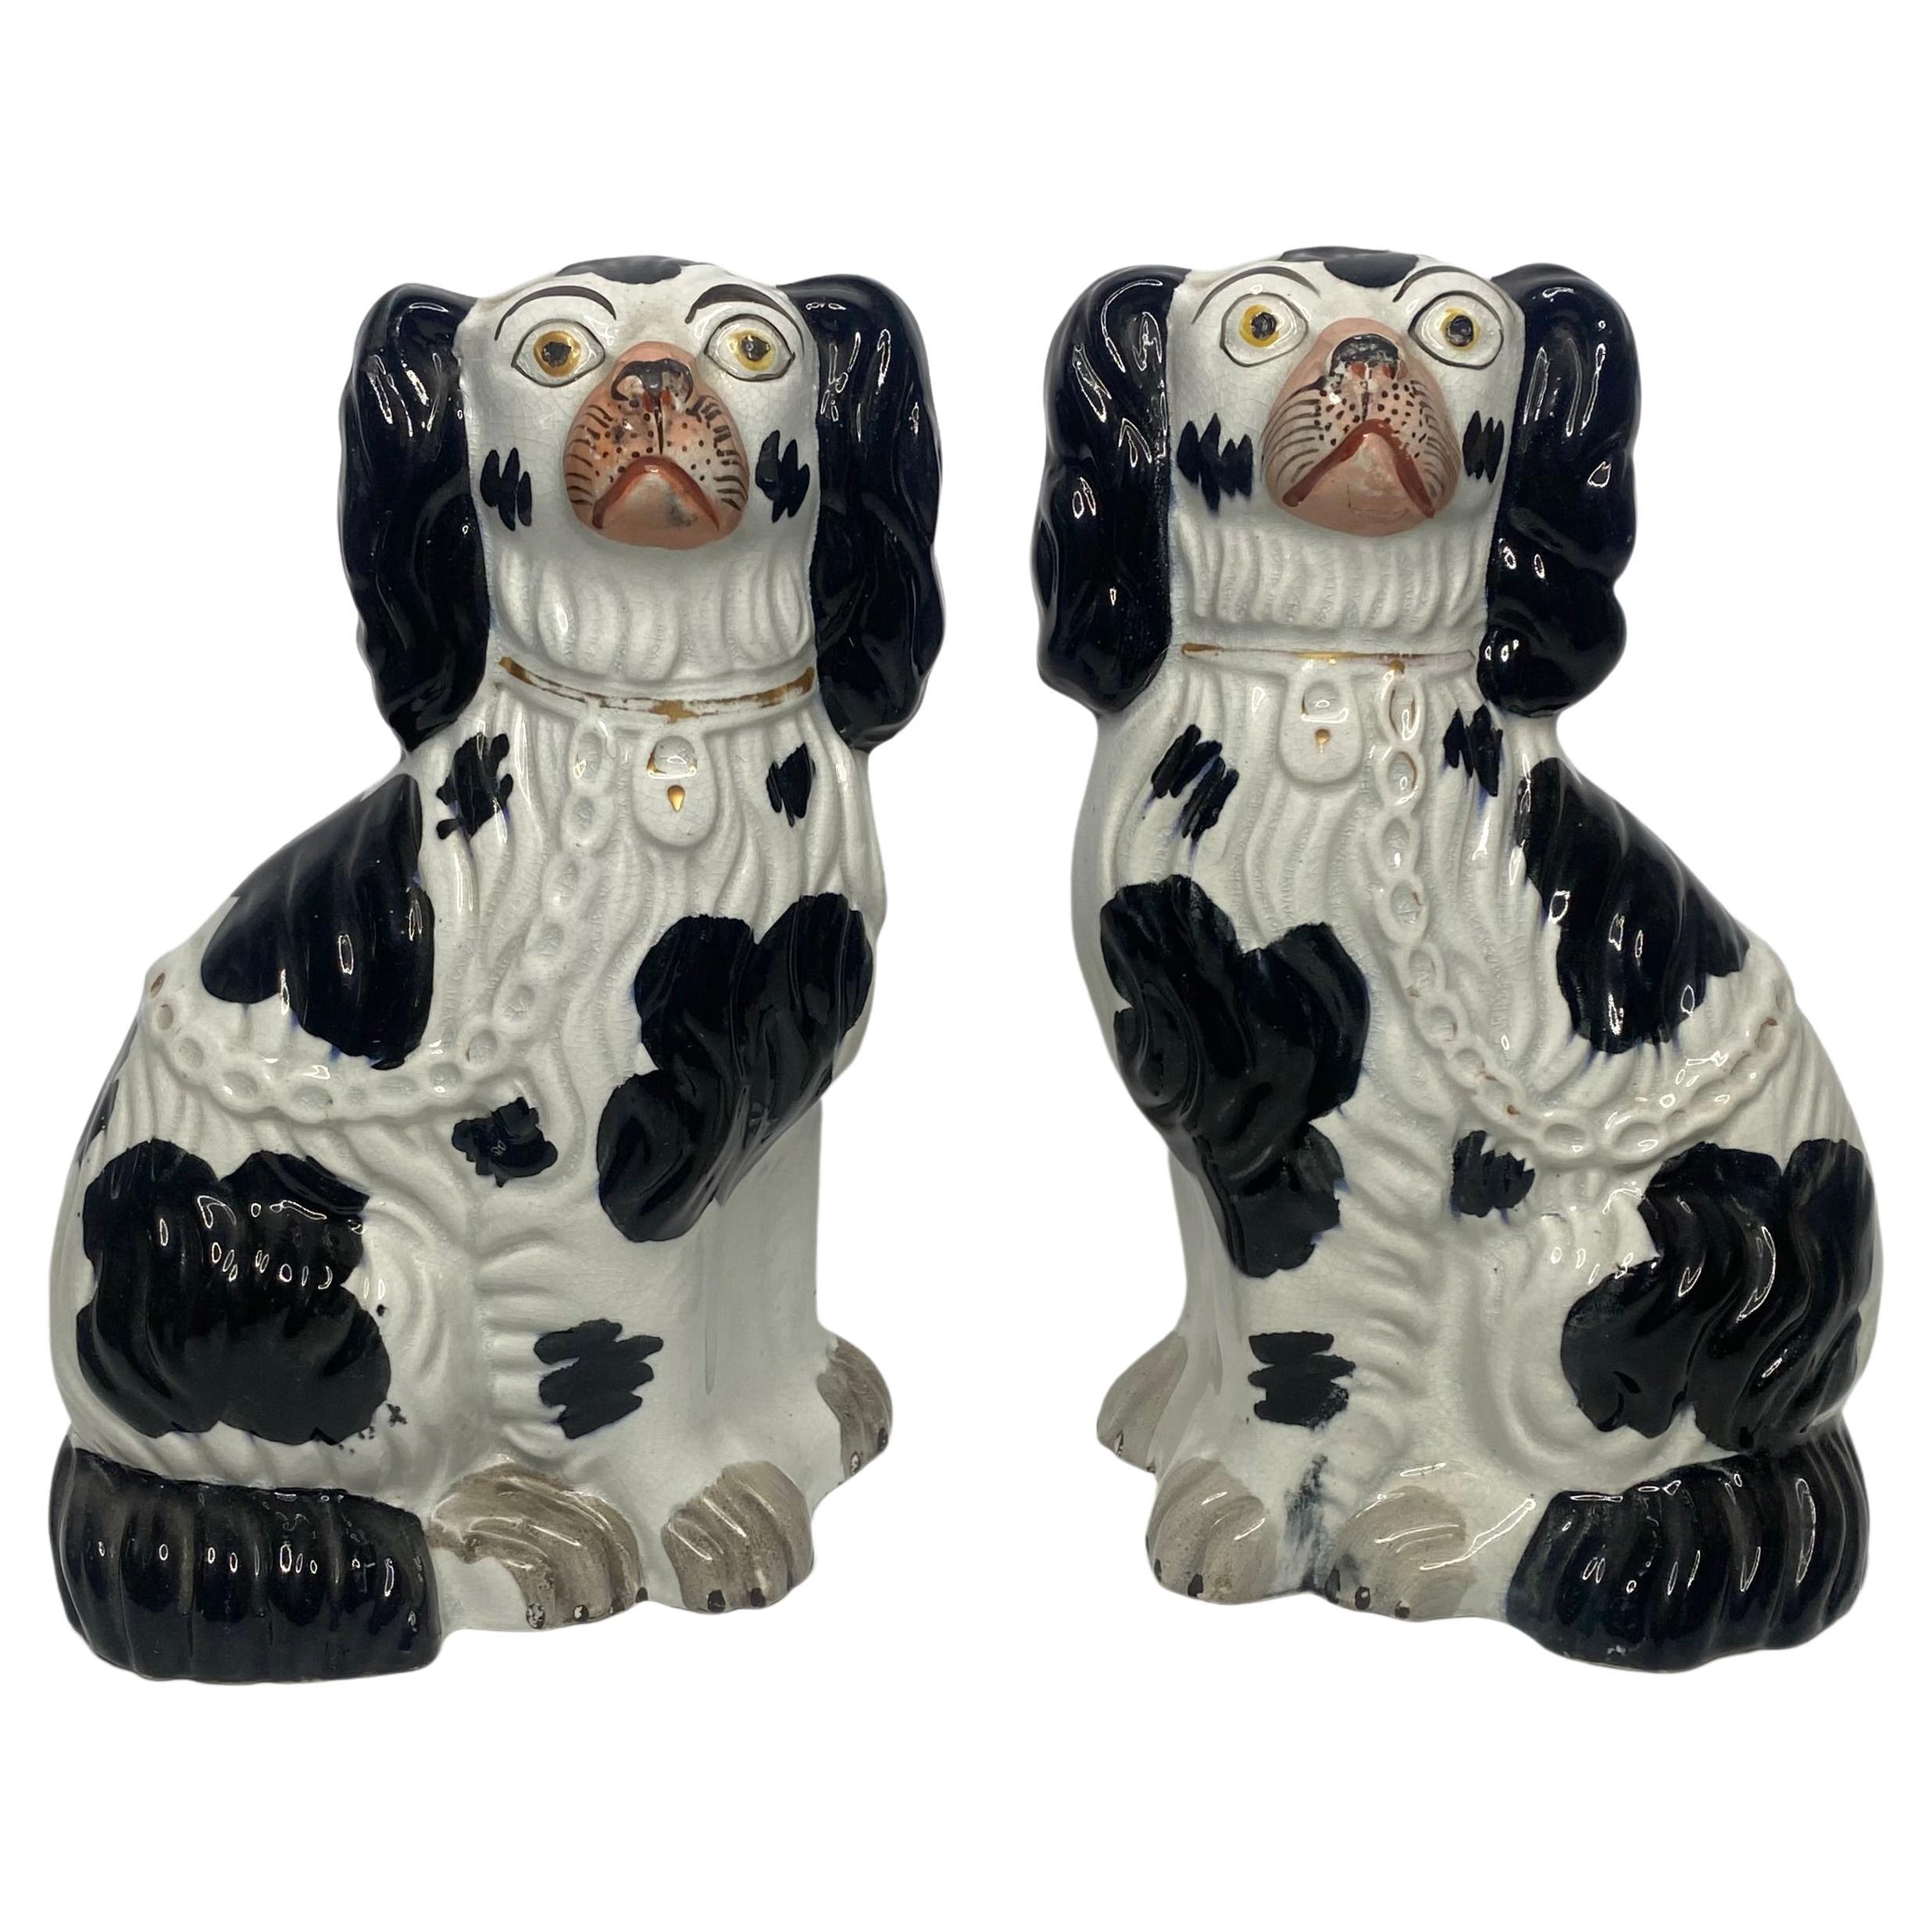 Pair Staffordshire pottery Spaniels, c. 1850.